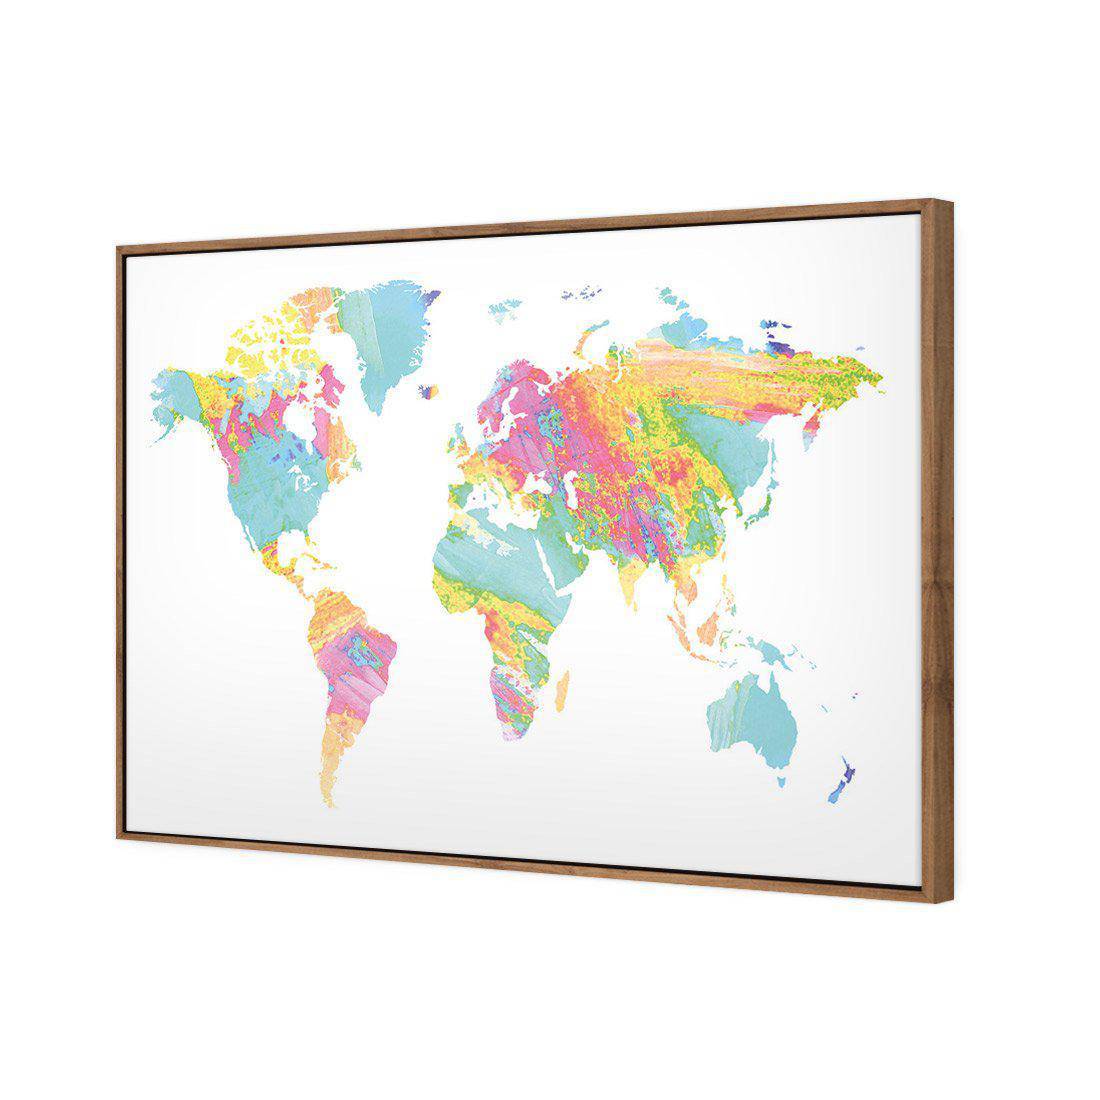 Painted Map Of The World, Pastel Canvas Art-Canvas-Wall Art Designs-45x30cm-Canvas - Natural Frame-Wall Art Designs